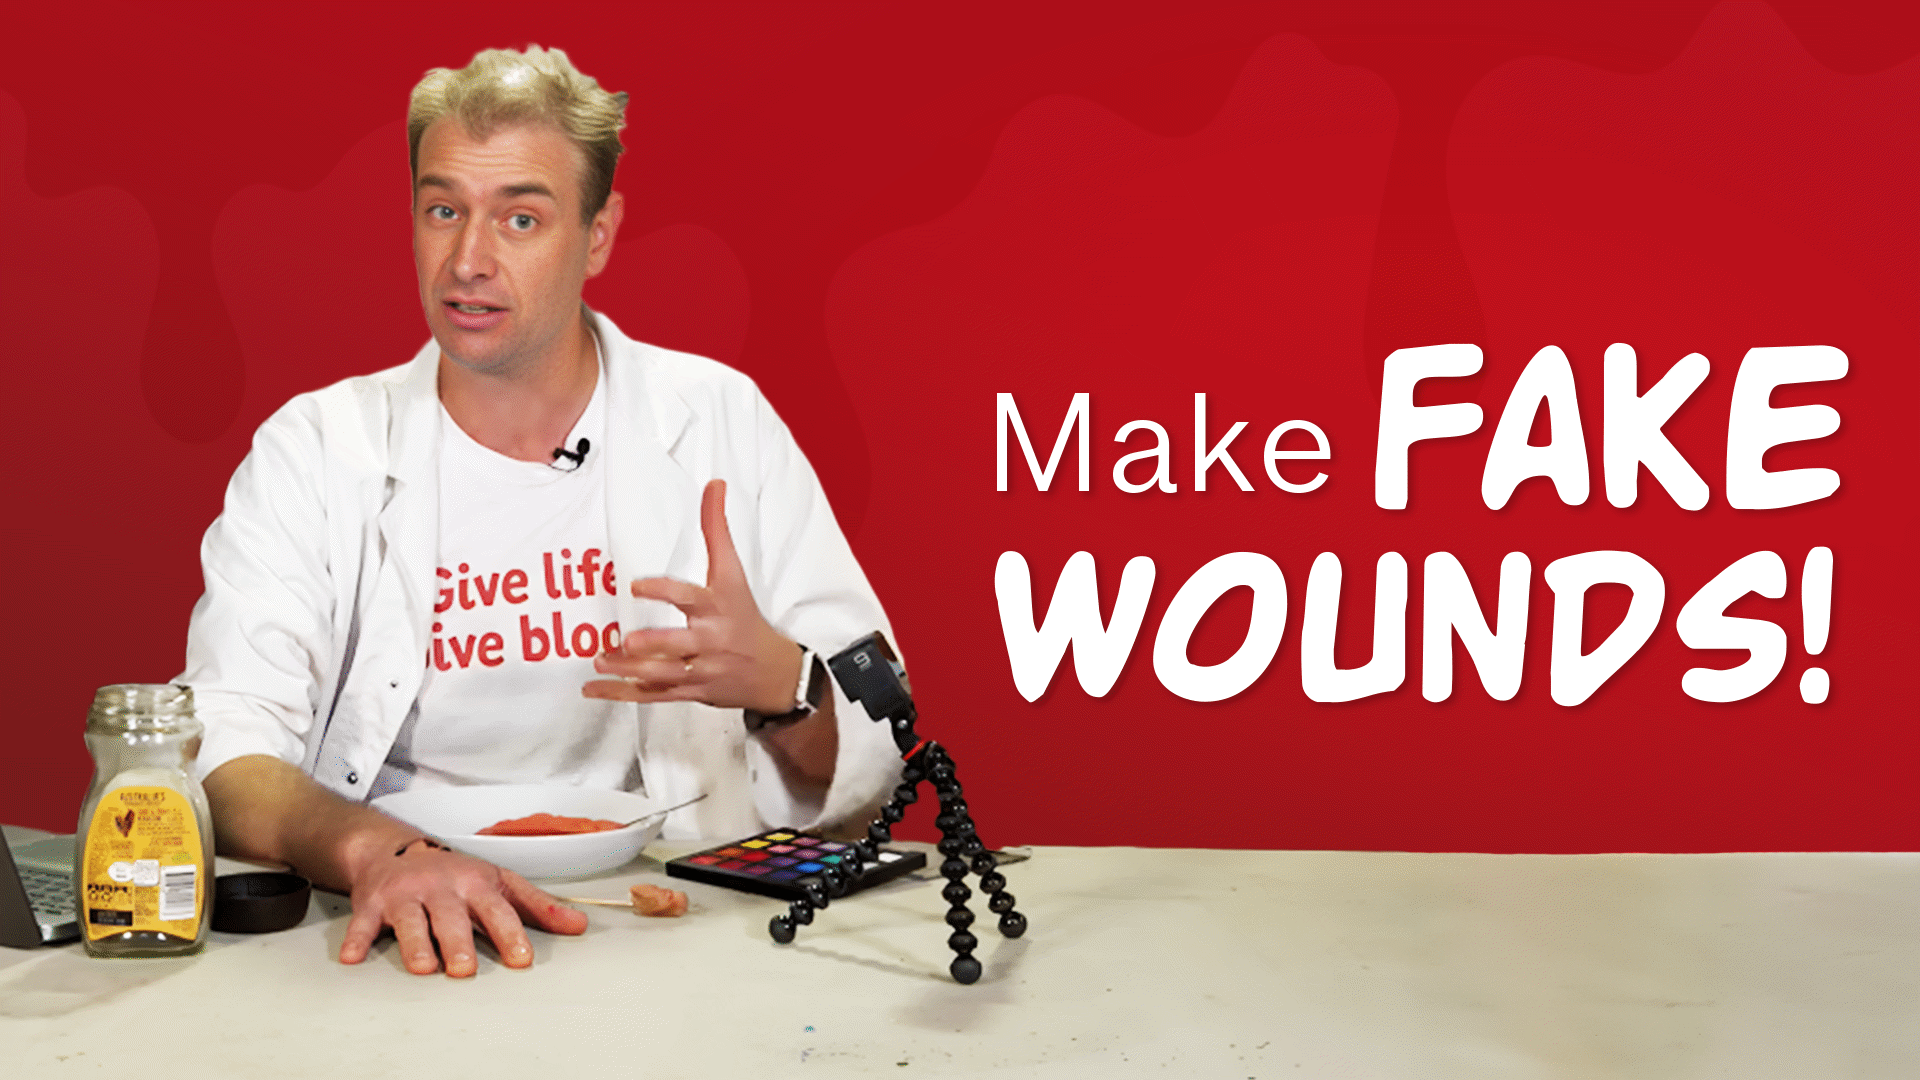 Fake Wounds Video Teaching Resources | ClickView